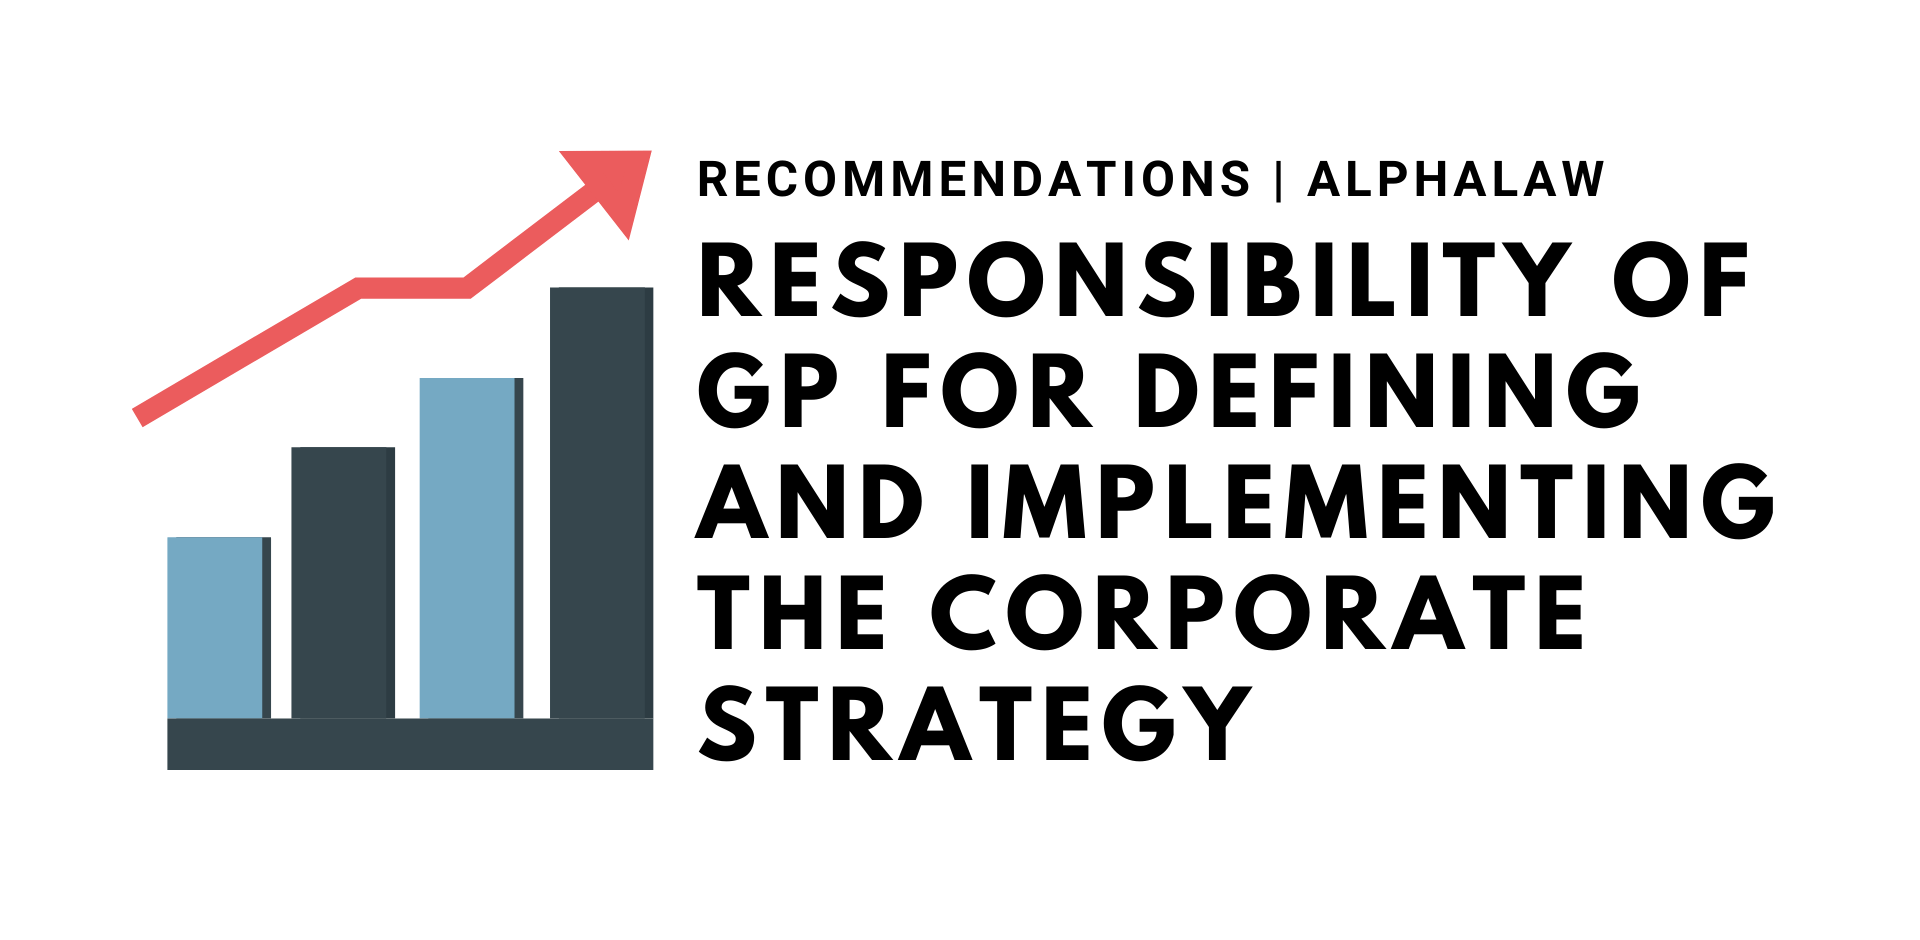 Responsibility of GP for Defining and Implementing the Corporate Strategy of the Portfolio Company on Behalf of the Fund